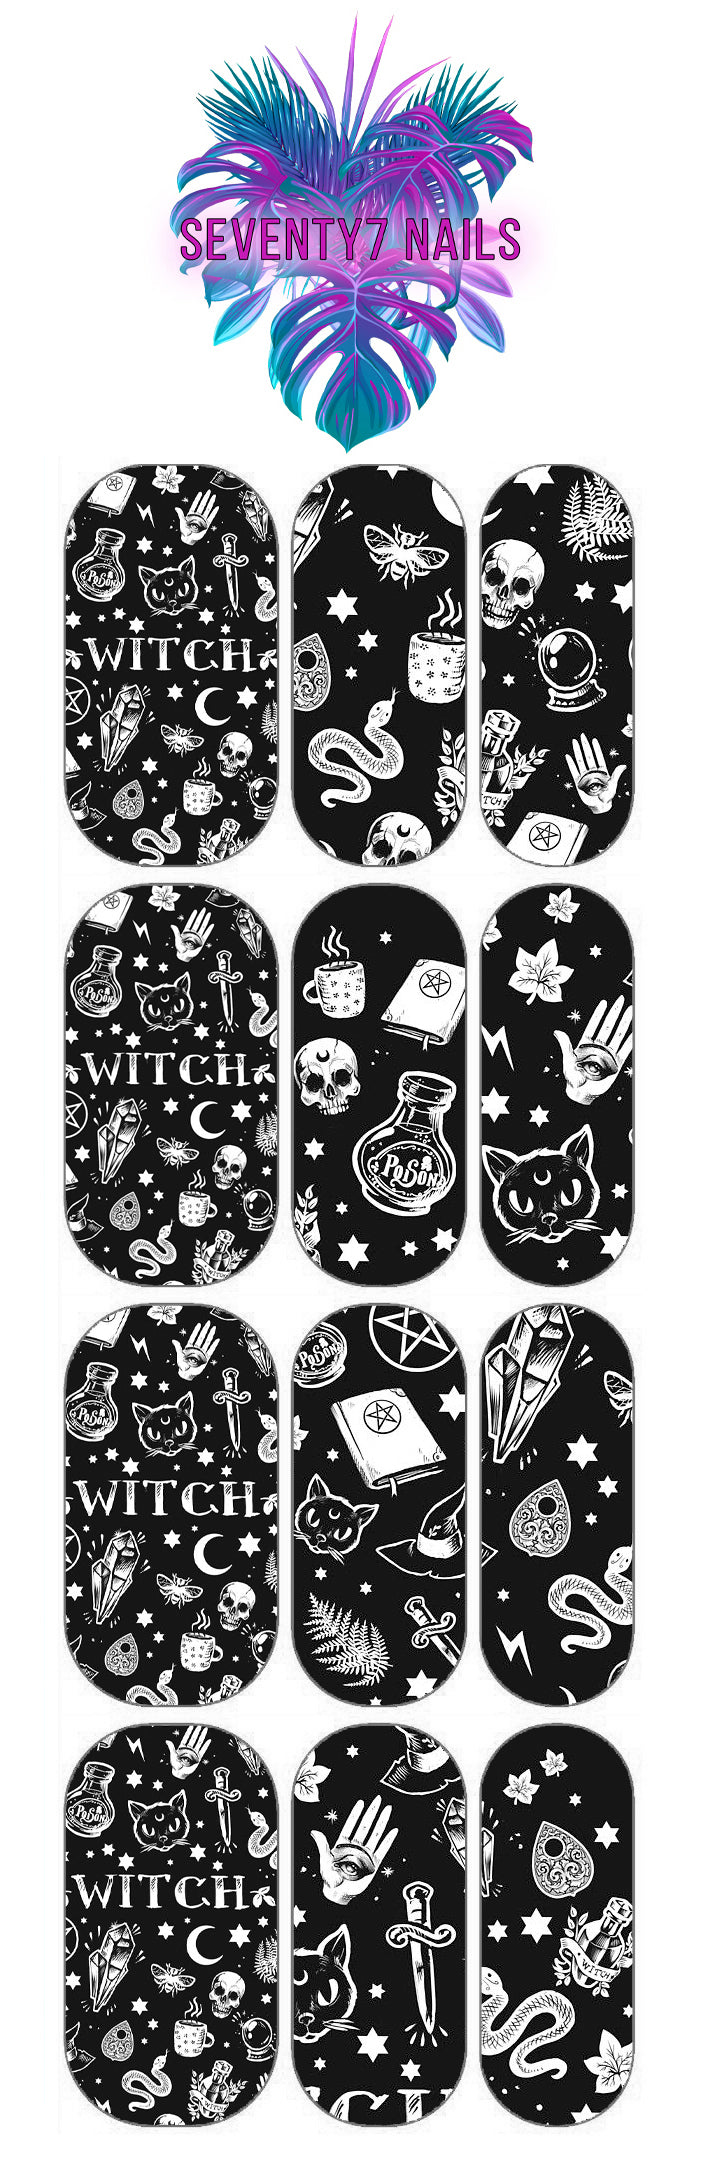 Waterslide Nail Decals - Witchy